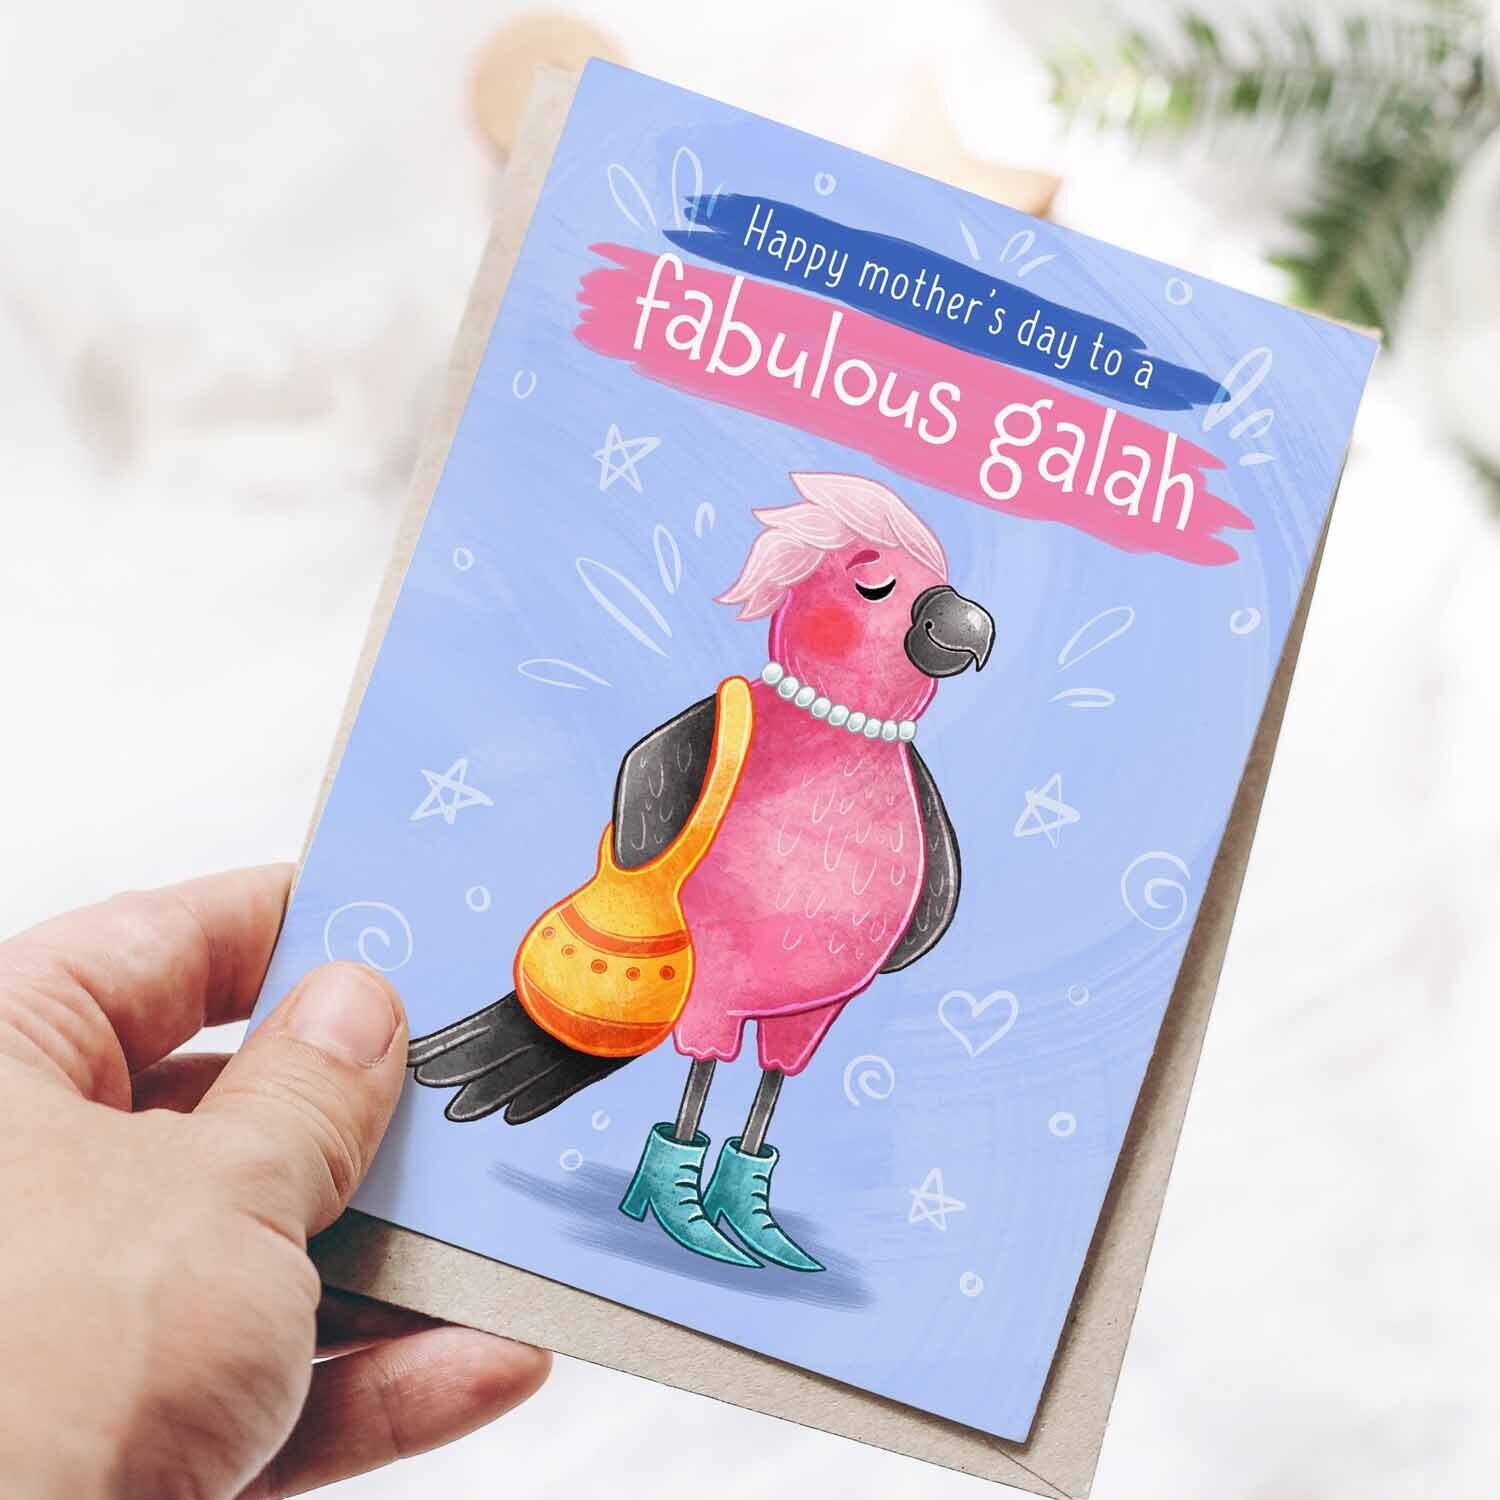 Happy mother’s day fabulous galah greeting card